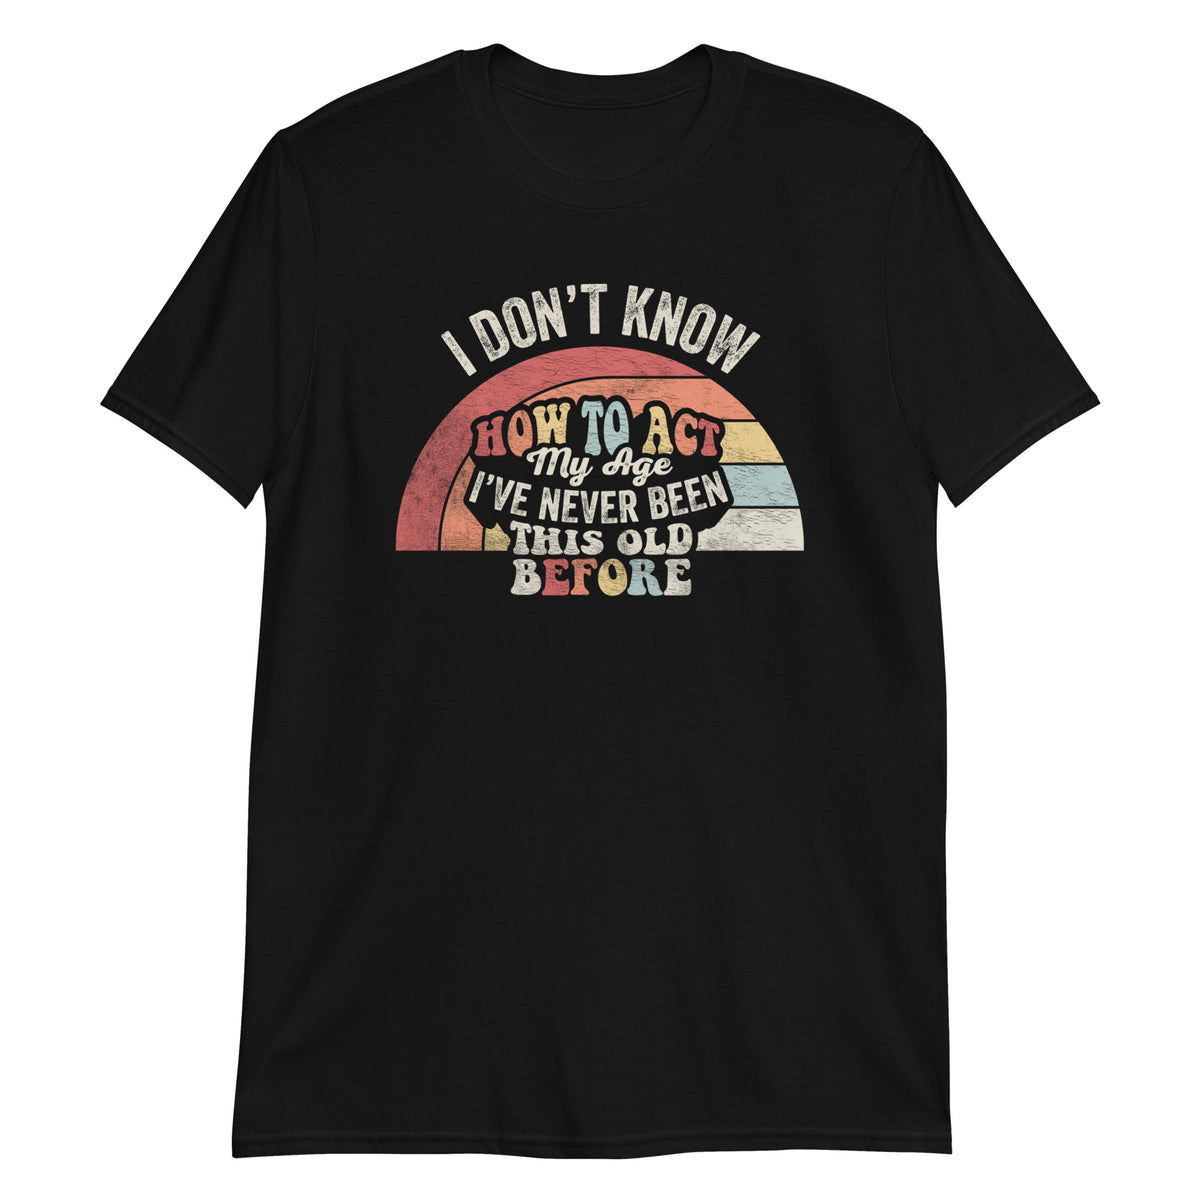 I Don't Konw How to Act My Age T-Shirt